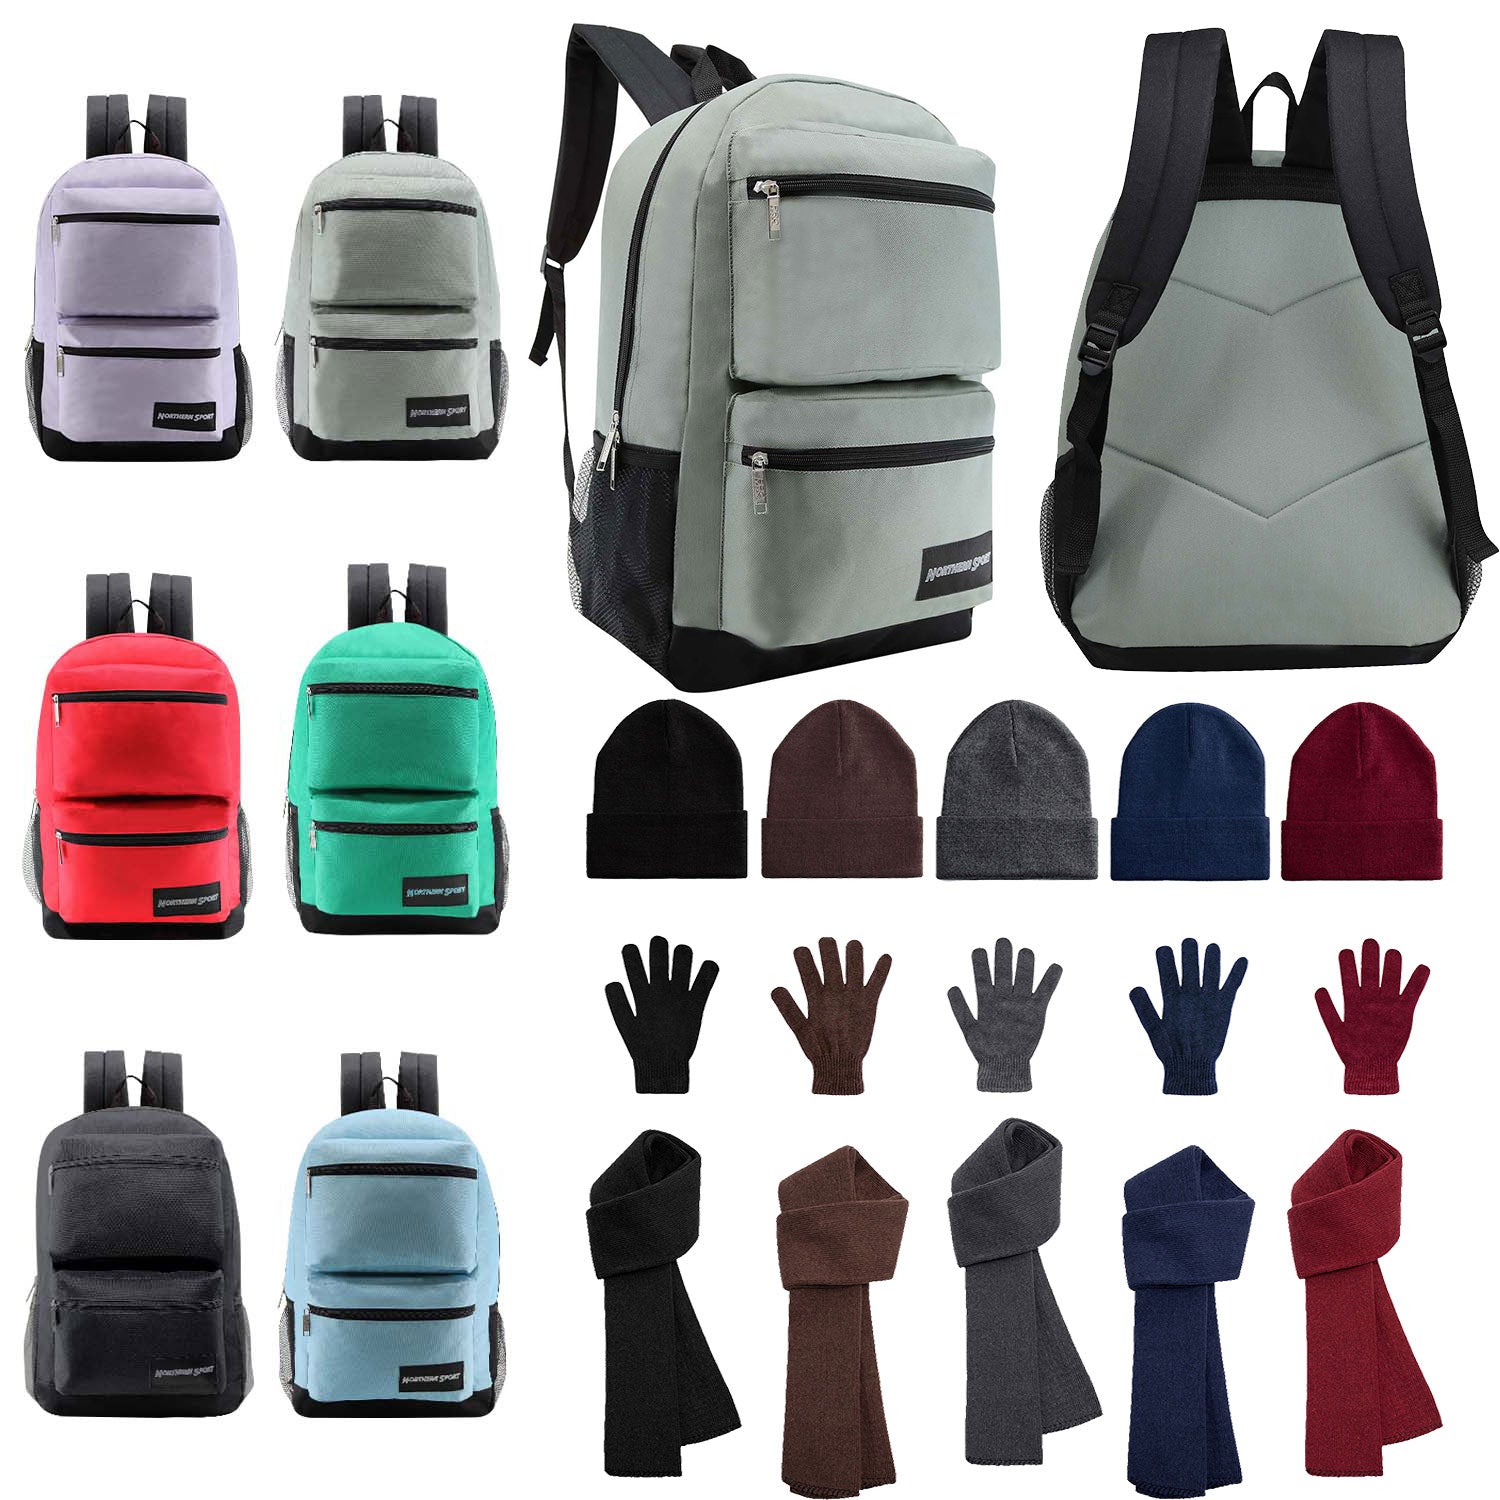 Bulk Case of 12 19" Backpacks and 12 Winter Item Sets - Wholesale Care Package - Emergencies, Homeless, Charity